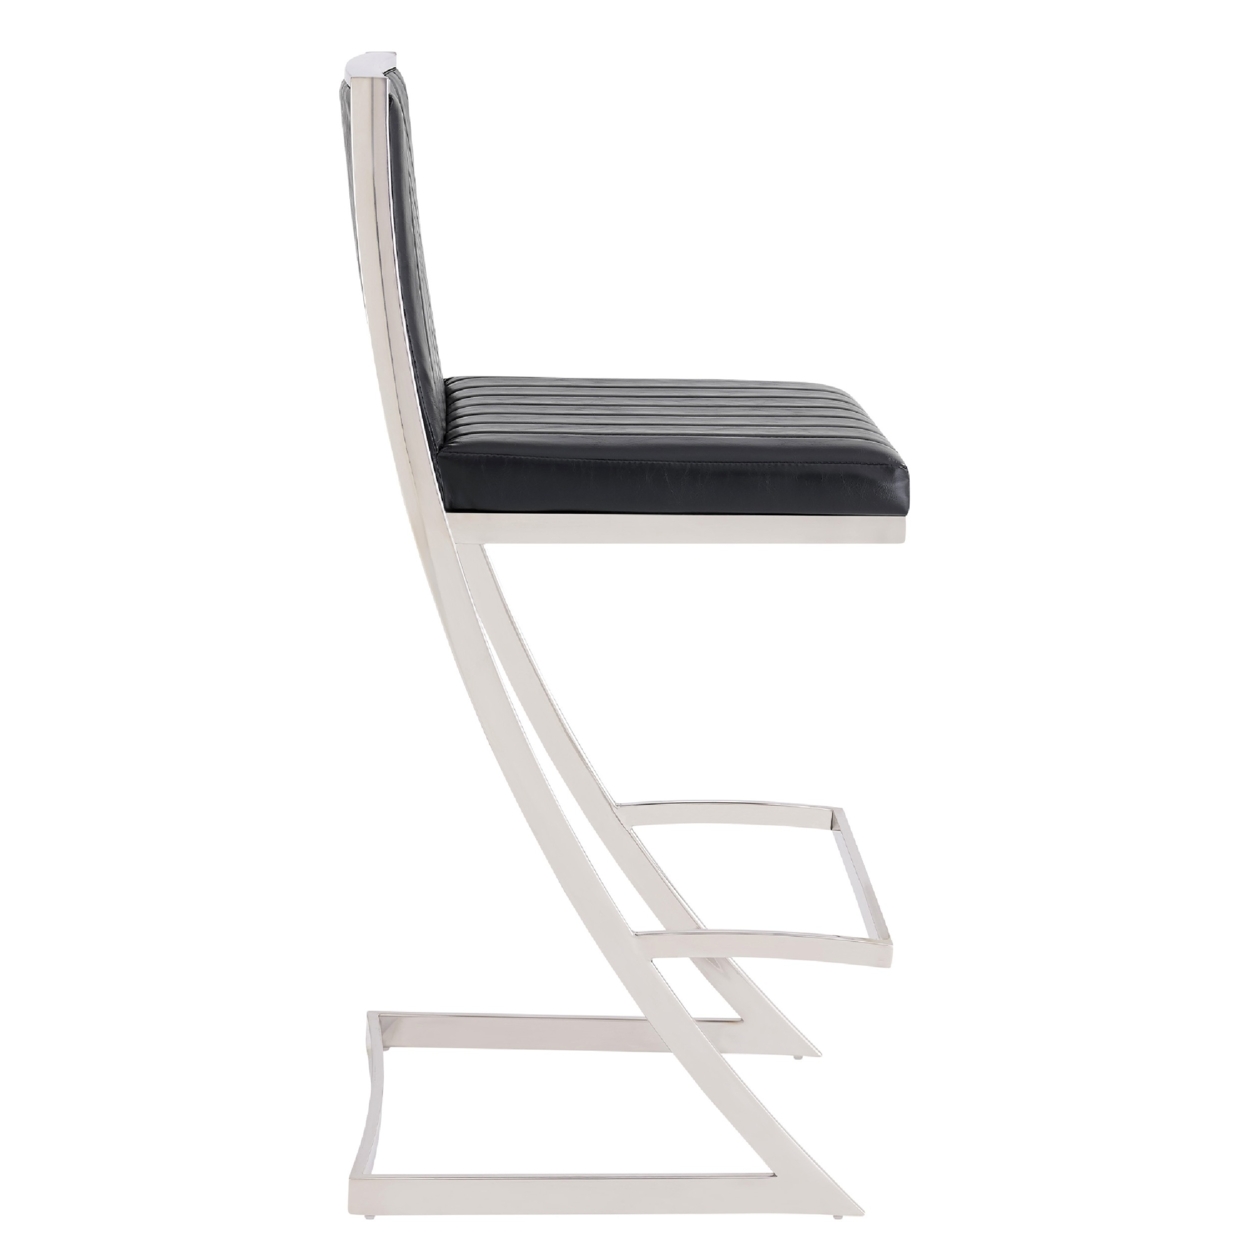 Barstool With Channel Stitching And Angled Cantilever Base, Black And Silver- Saltoro Sherpi